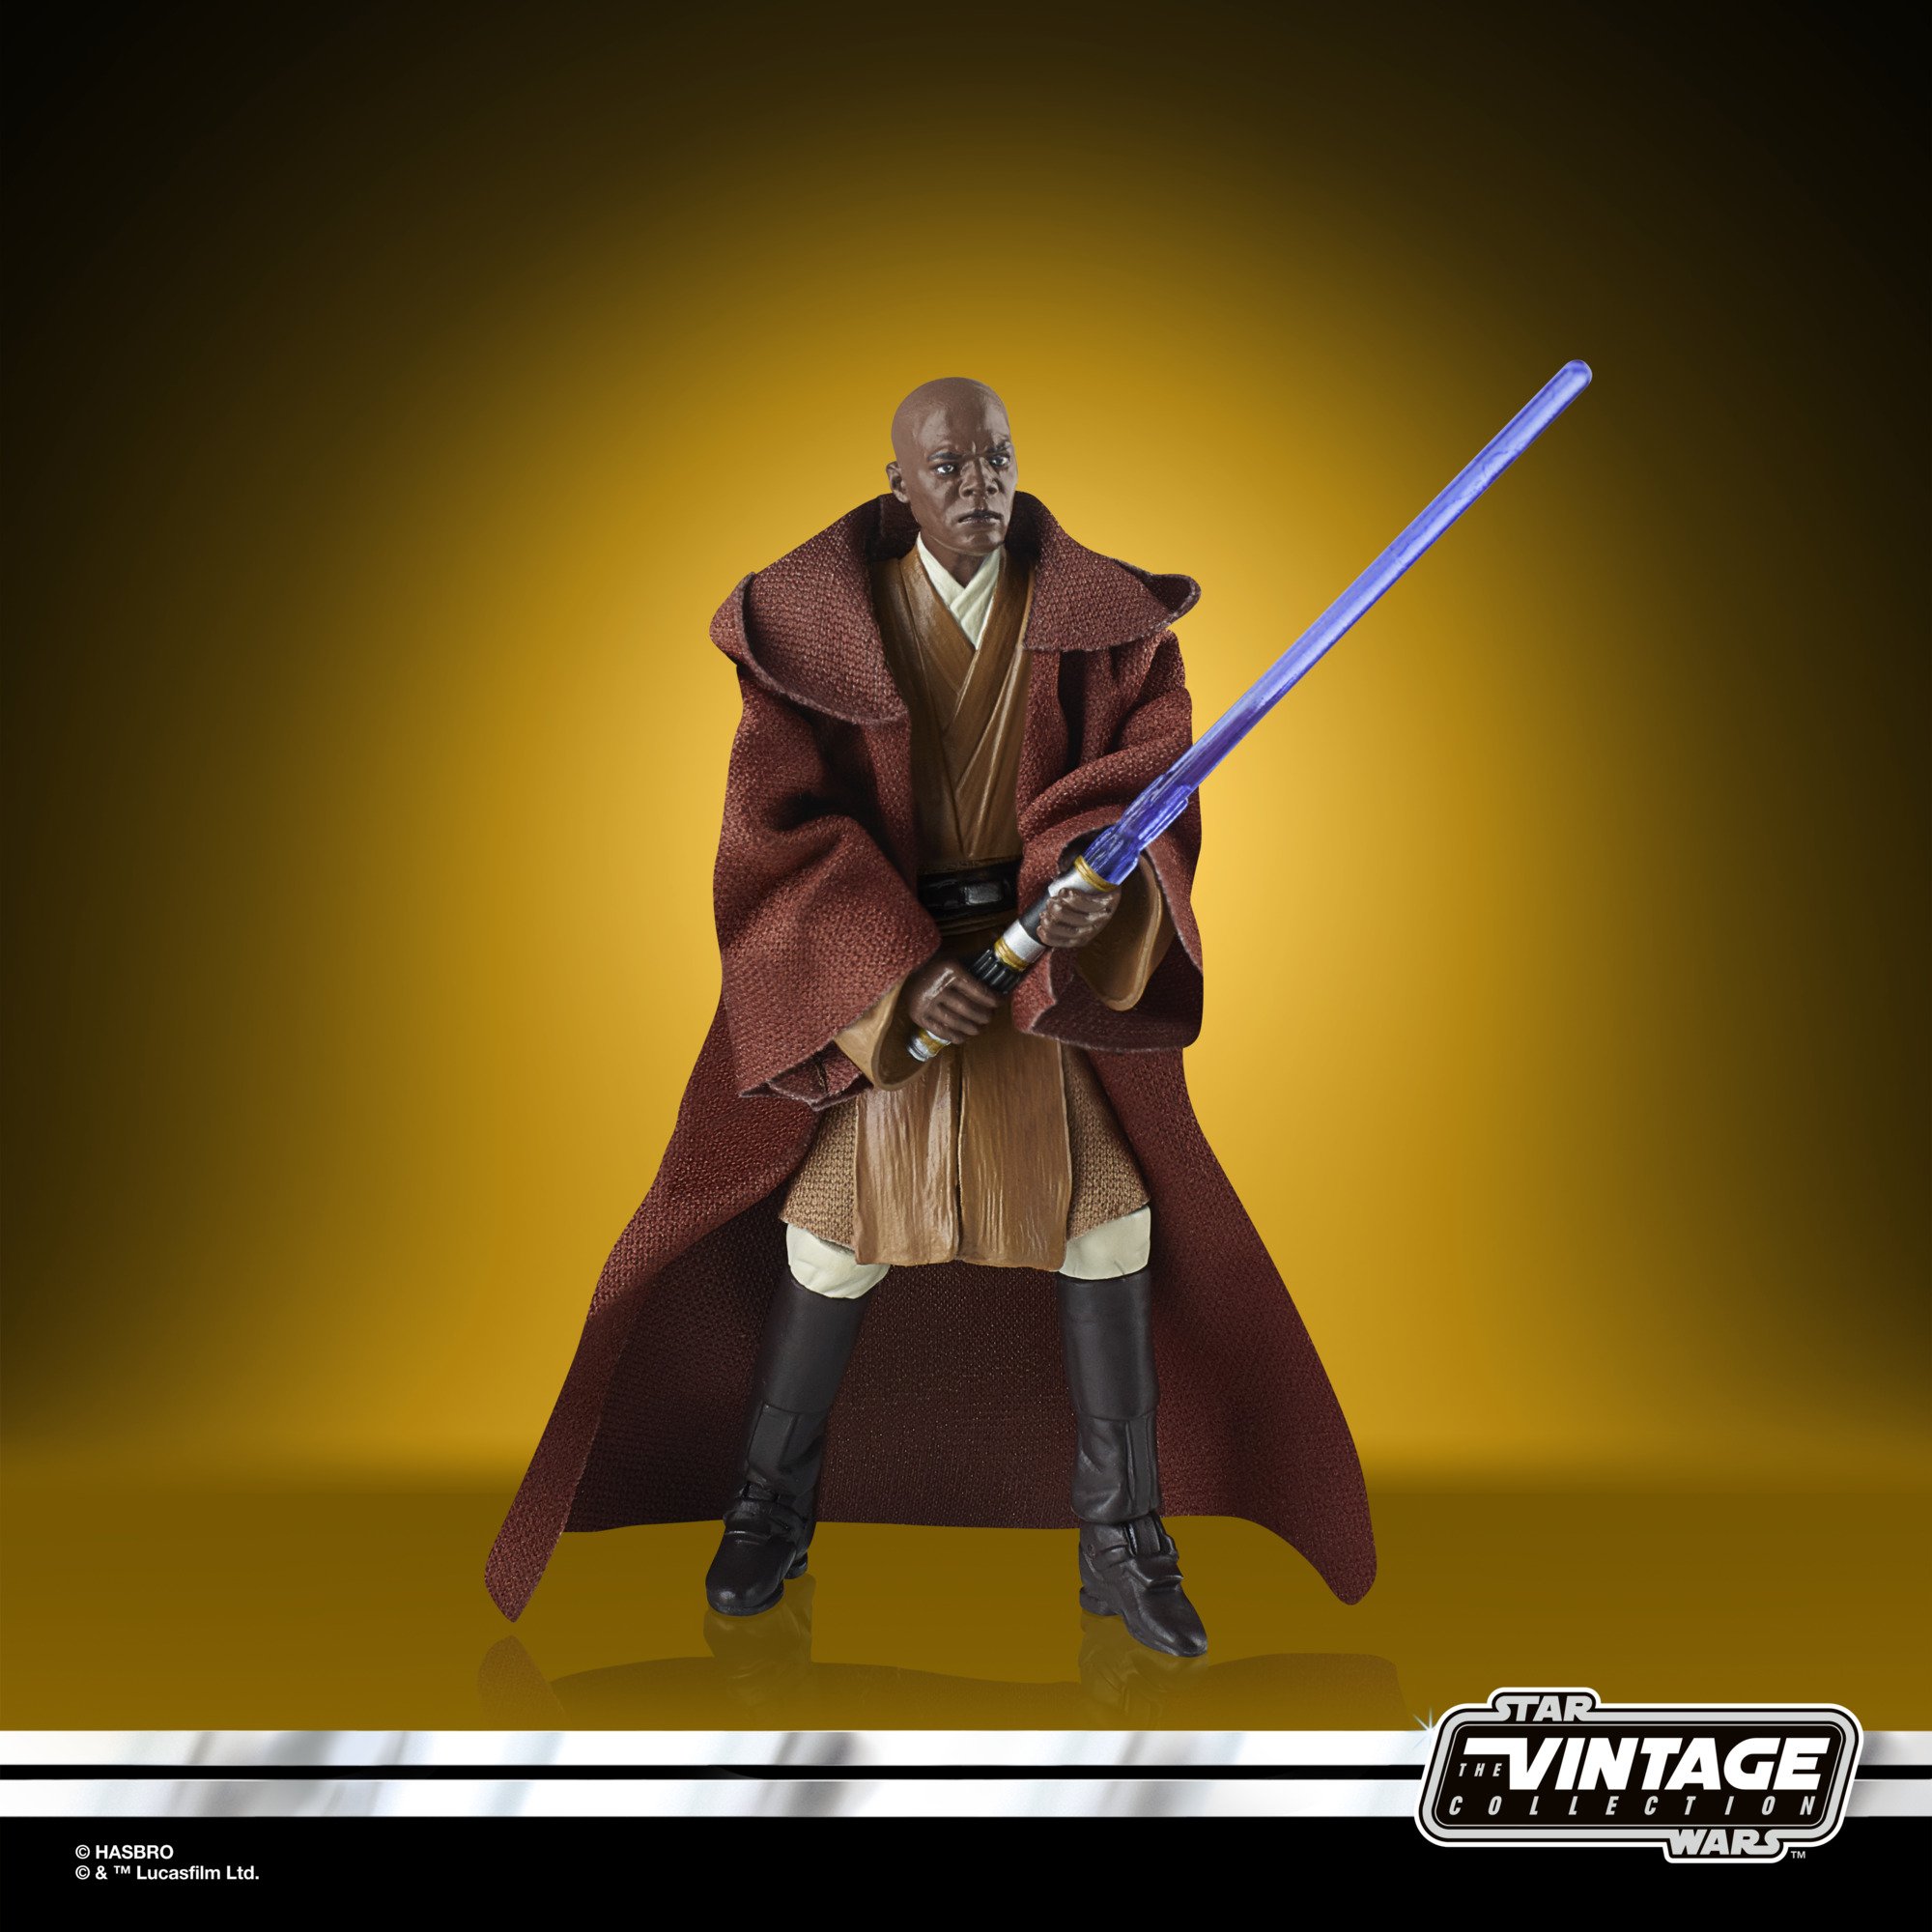 Star Wars - The Vintage Collection - Attack of the Clones - Mace Windu 3.75inch Action Figure (LATE NO ETA)